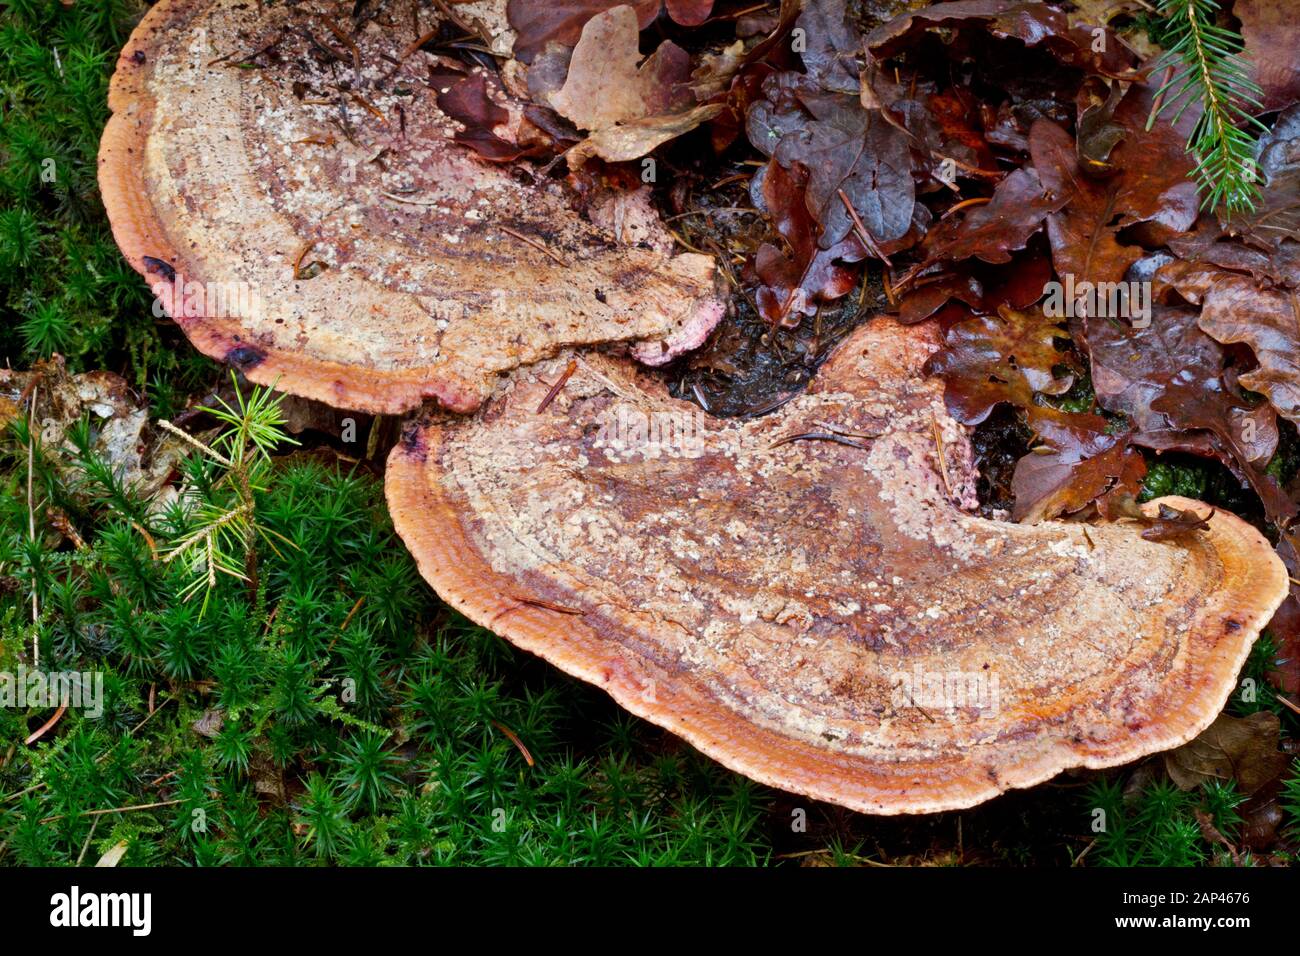 Conk of a bracket fungus growing on a rotting tree trunk, between moss and dead leaves Stock Photo